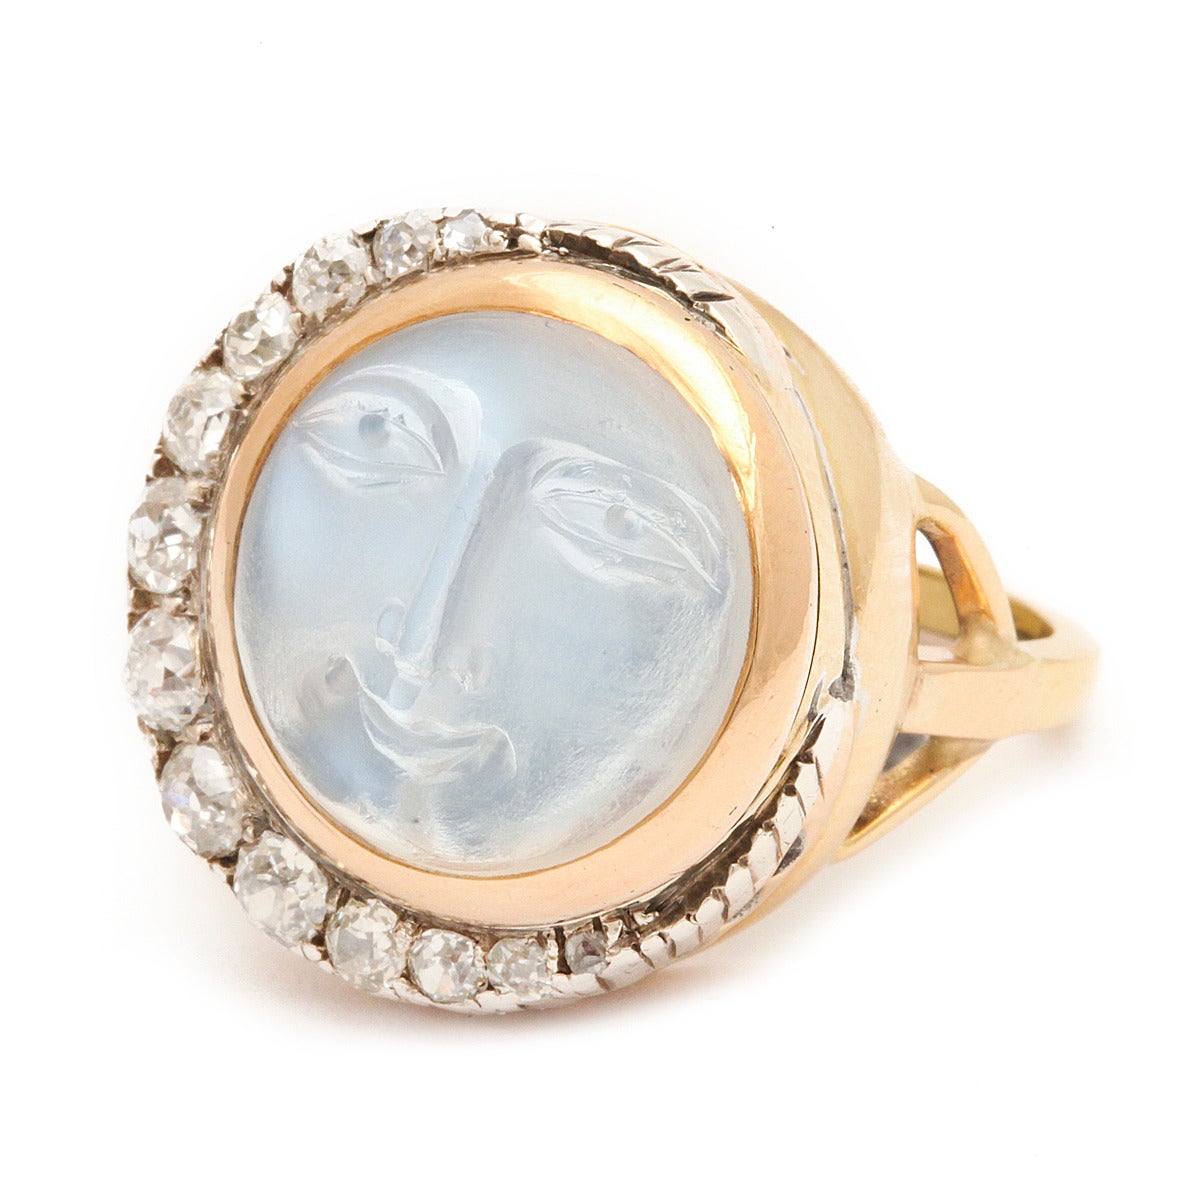 Carved moonstone man in the moon ring with an old-mine diamond crescent moon, set in silver and gold.

English, mid to late 19th century